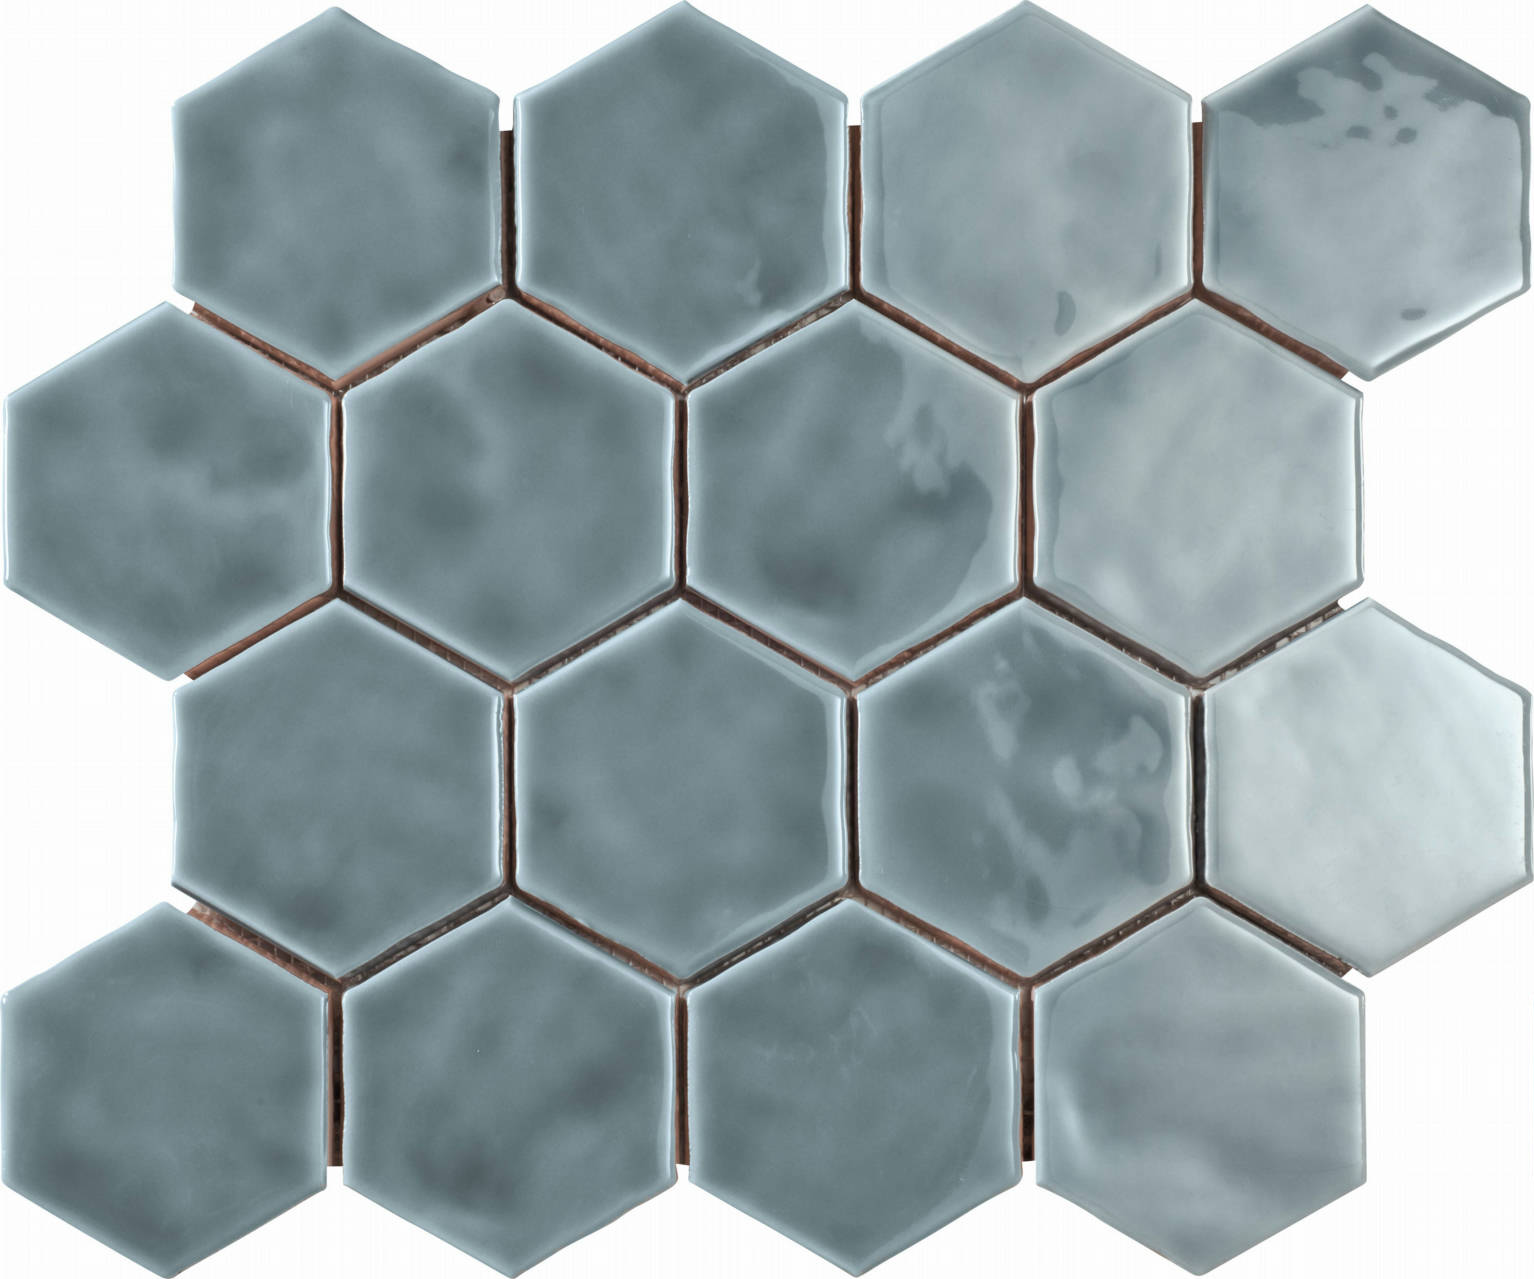 Haze Glossy | Stones And More | Finest selection of Mosaics, Glass, Tile and Stone